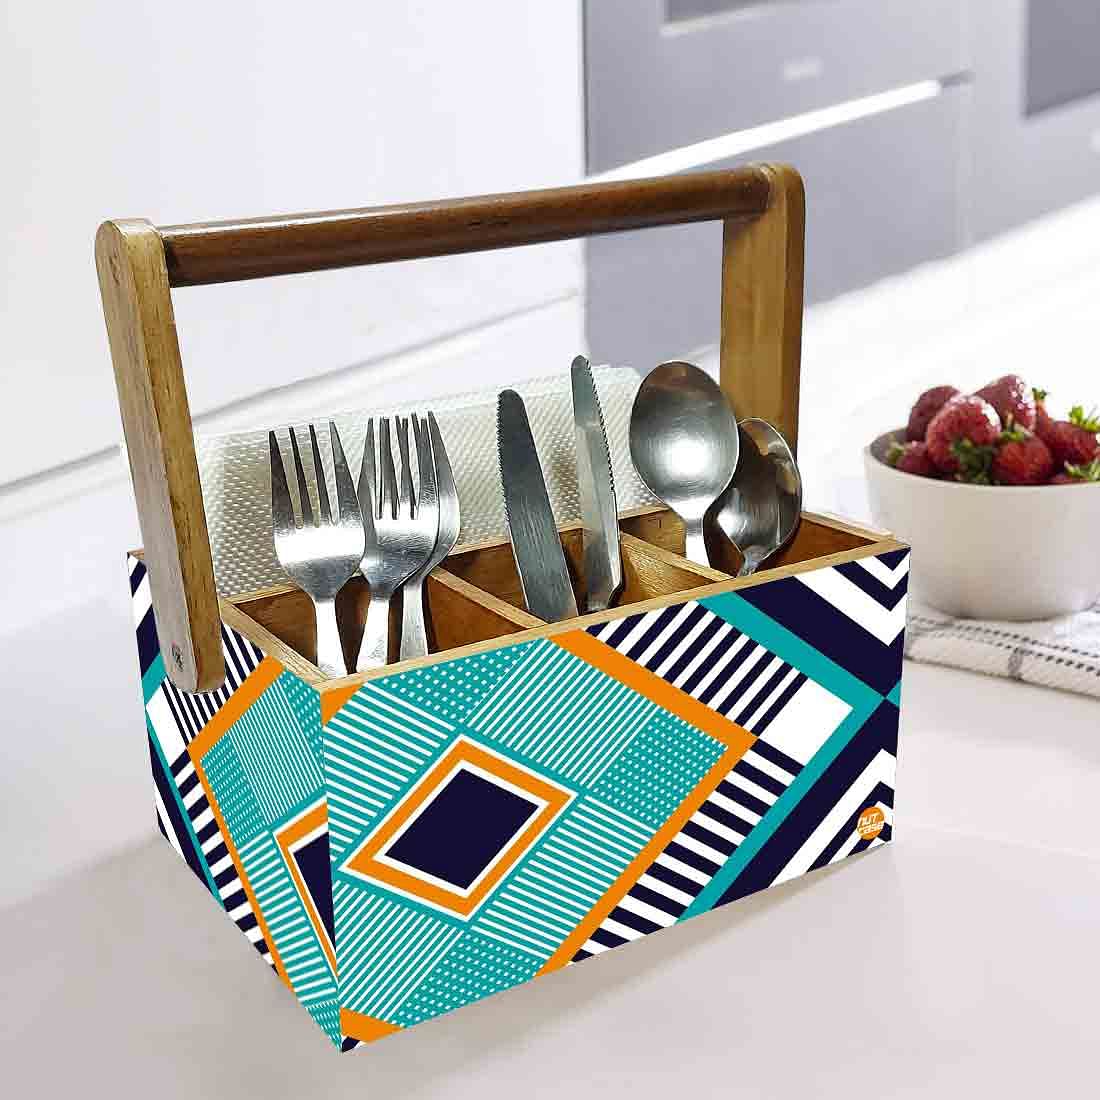 Cutlery Holders for Restaurant Tables Spoon Forks Tissue Organizer - Trendy Vibes Nutcase